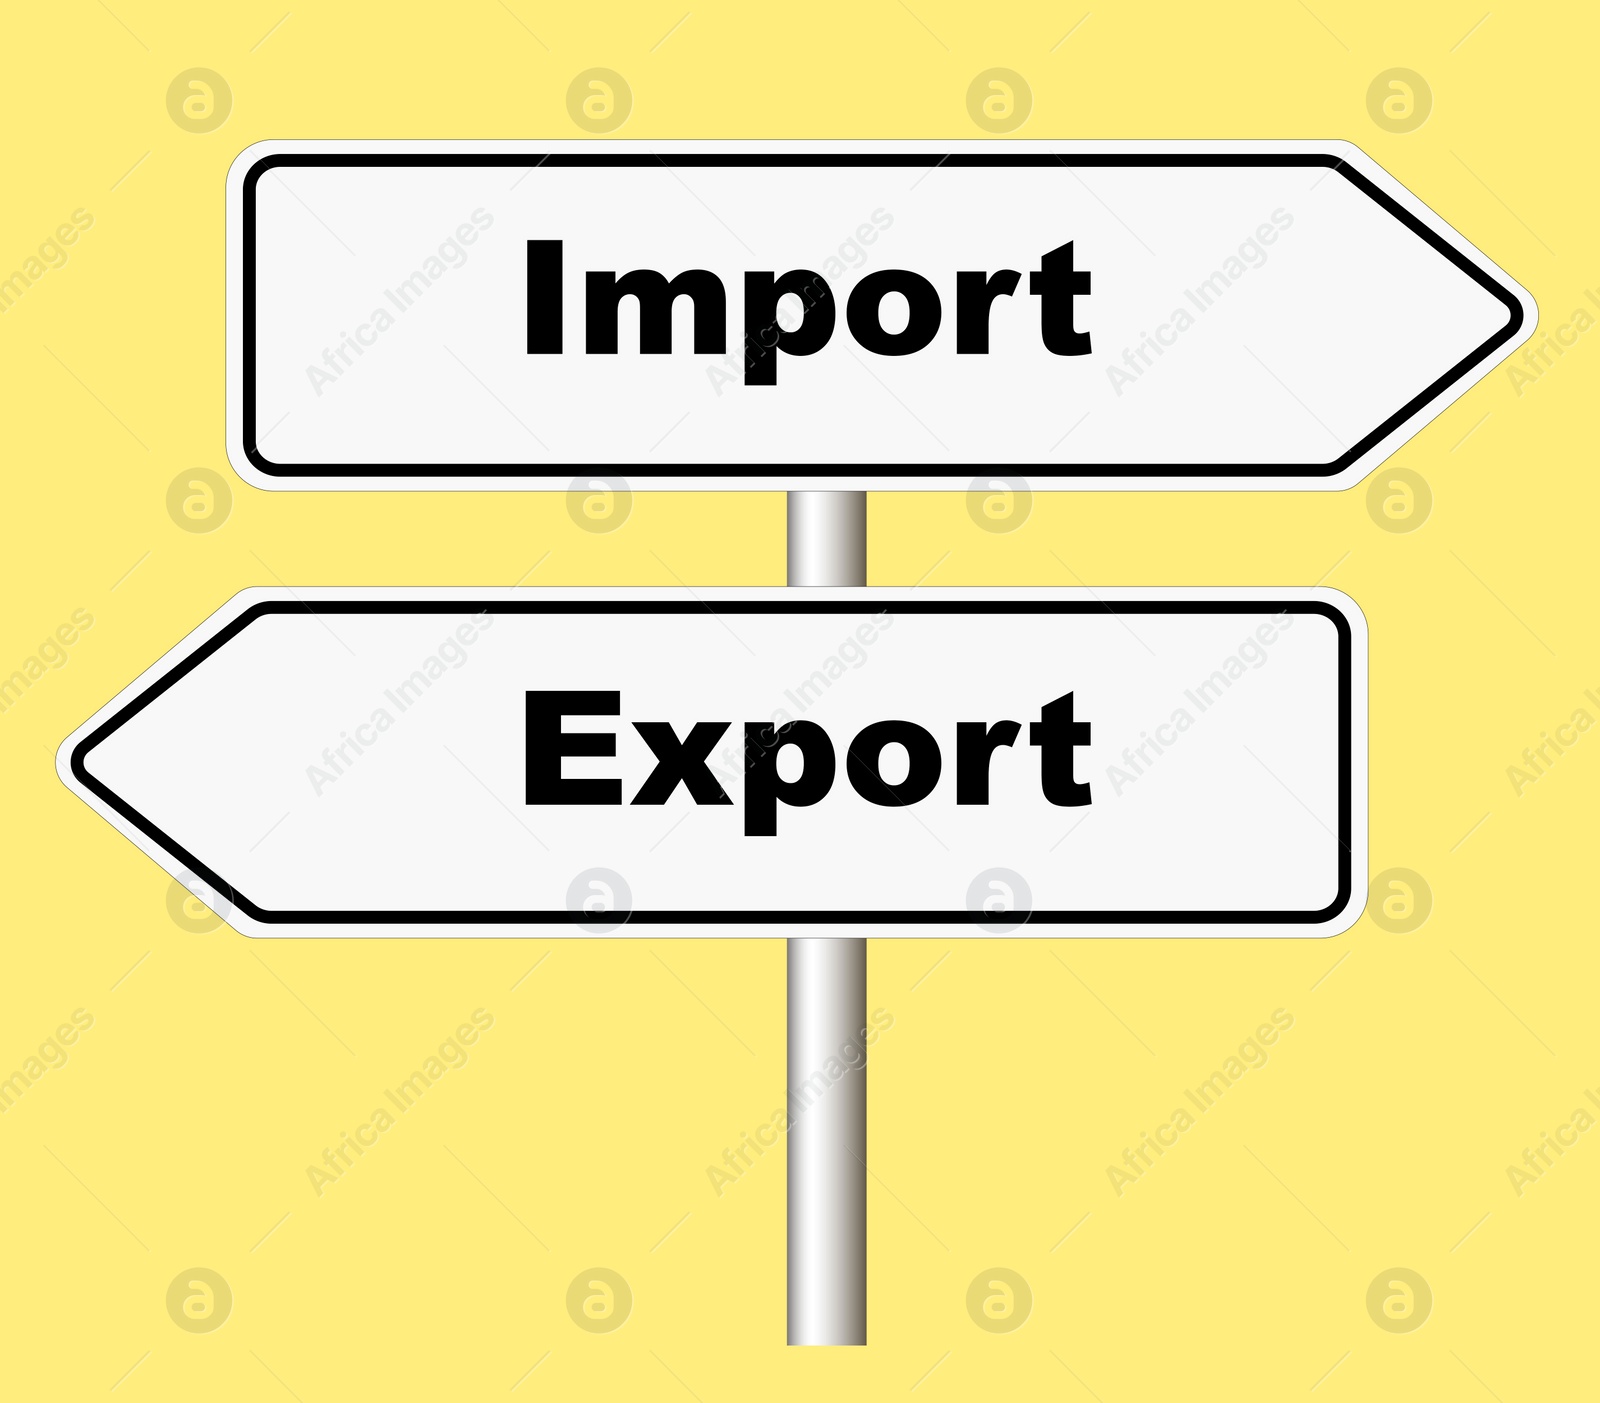 Illustration of Import Export arrow shaped road sign on yellow background